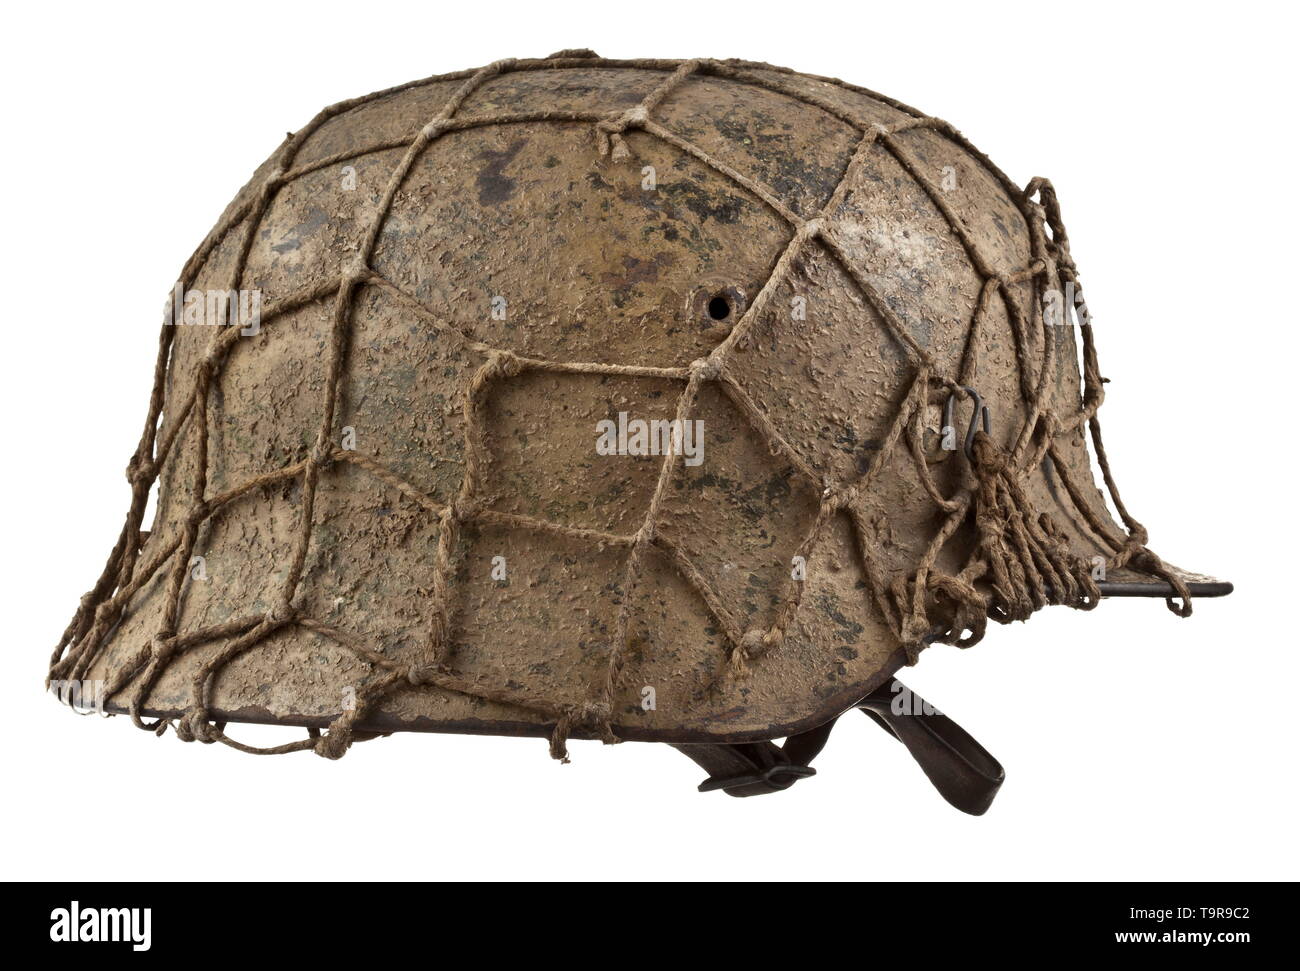 A steel helmet M 40 in Normandy camouflage with camo net Maker Quist, Esslingen Steel skull with preserved ochre, green and earth-brown rough camouflage paint, on which is a net for affixing additional camouflage material, the interior with maker stamps 'Q64' and 'T730'. Complete inner liner with chinstrap, obvious signs of usage. historic, historical, army, armies, armed forces, military, militaria, object, objects, stills, clipping, clippings, cut out, cut-out, cut-outs, 20th century, Editorial-Use-Only Stock Photo